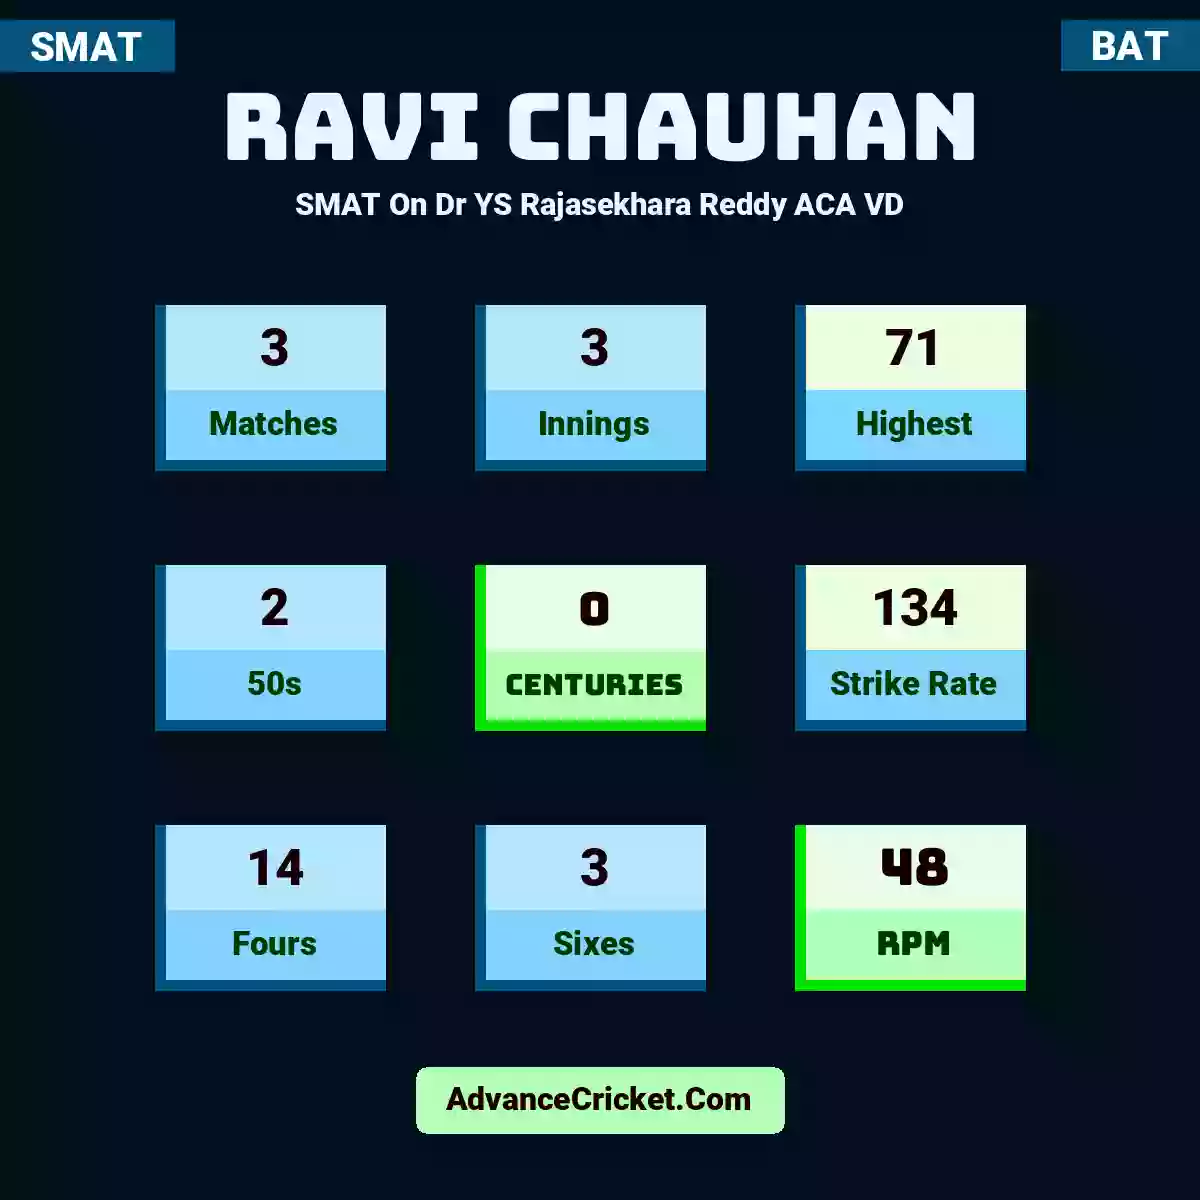 Ravi Chauhan SMAT  On Dr YS Rajasekhara Reddy ACA VD, Ravi Chauhan played 3 matches, scored 71 runs as highest, 2 half-centuries, and 0 centuries, with a strike rate of 134. R.Chauhan hit 14 fours and 3 sixes, with an RPM of 48.